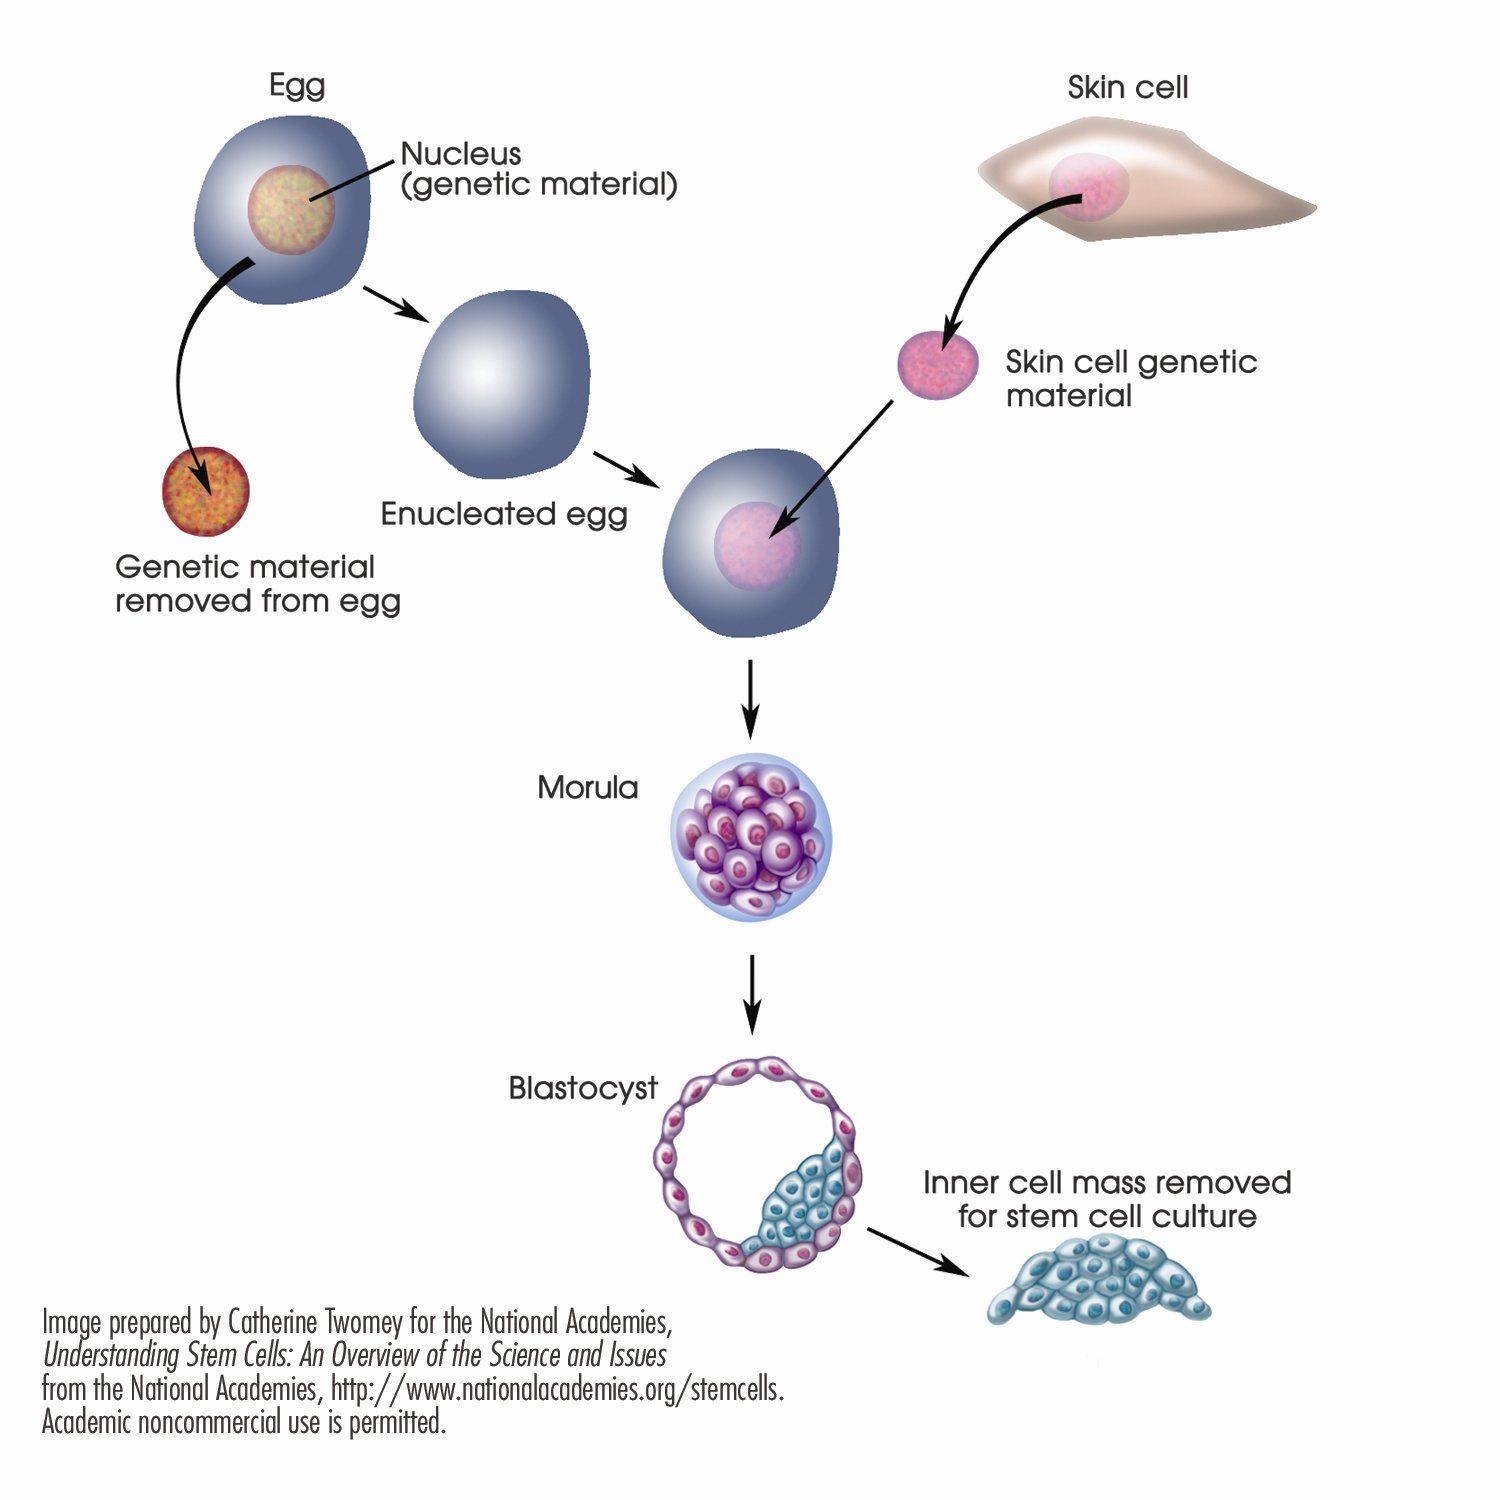 Adult embryonic stem cells